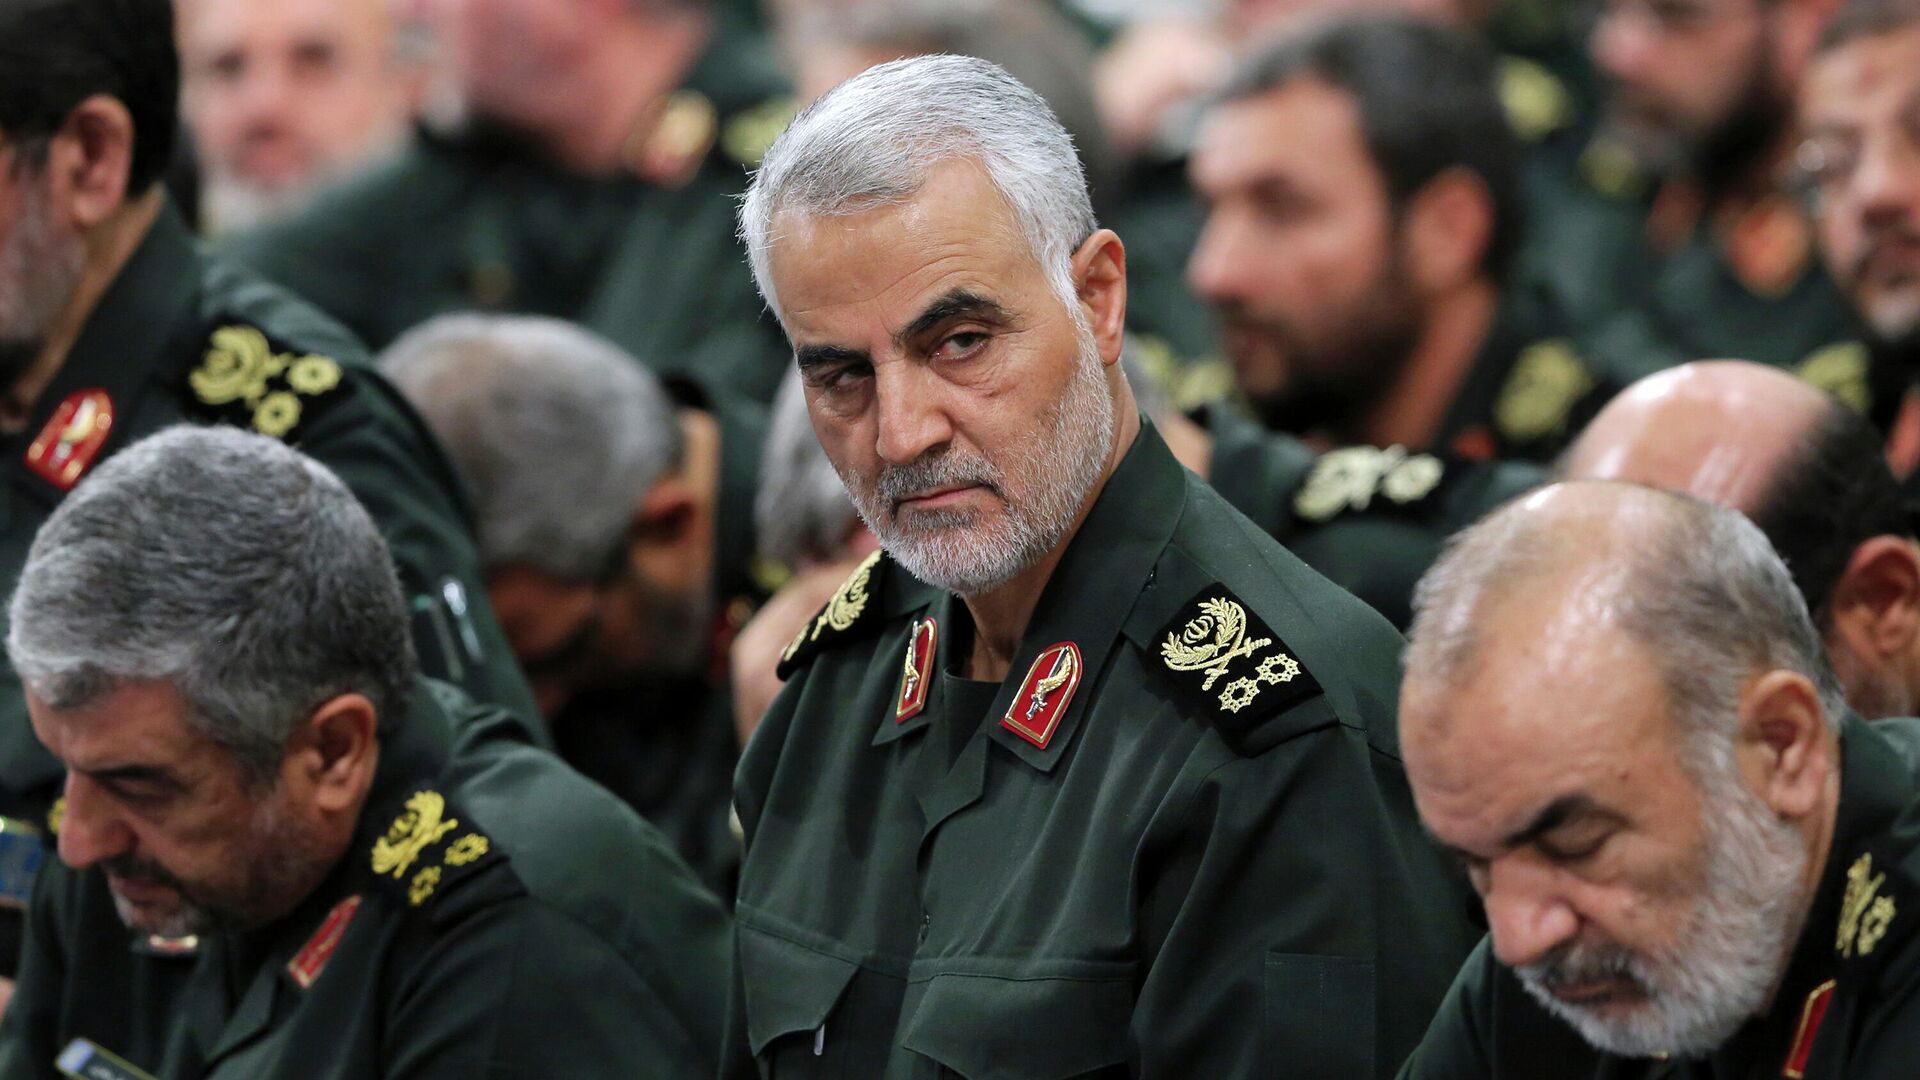 In this Sept. 18, 2016, file photo provided by an official website of the office of the Iranian supreme leader, Revolutionary Guard Gen. Qassem Soleimani, center, attends a meeting in Tehran, Iran. Iran executed Mahmoud Mousavi Majd convicted of providing information to the United States and Israel about the prominent Revolutionary Guard general later killed by a U.S. drone strike, state TV reported on Monday, July 20, 2020. (Office of the Iranian Supreme Leader via AP, File) - Sputnik International, 1920, 13.03.2022